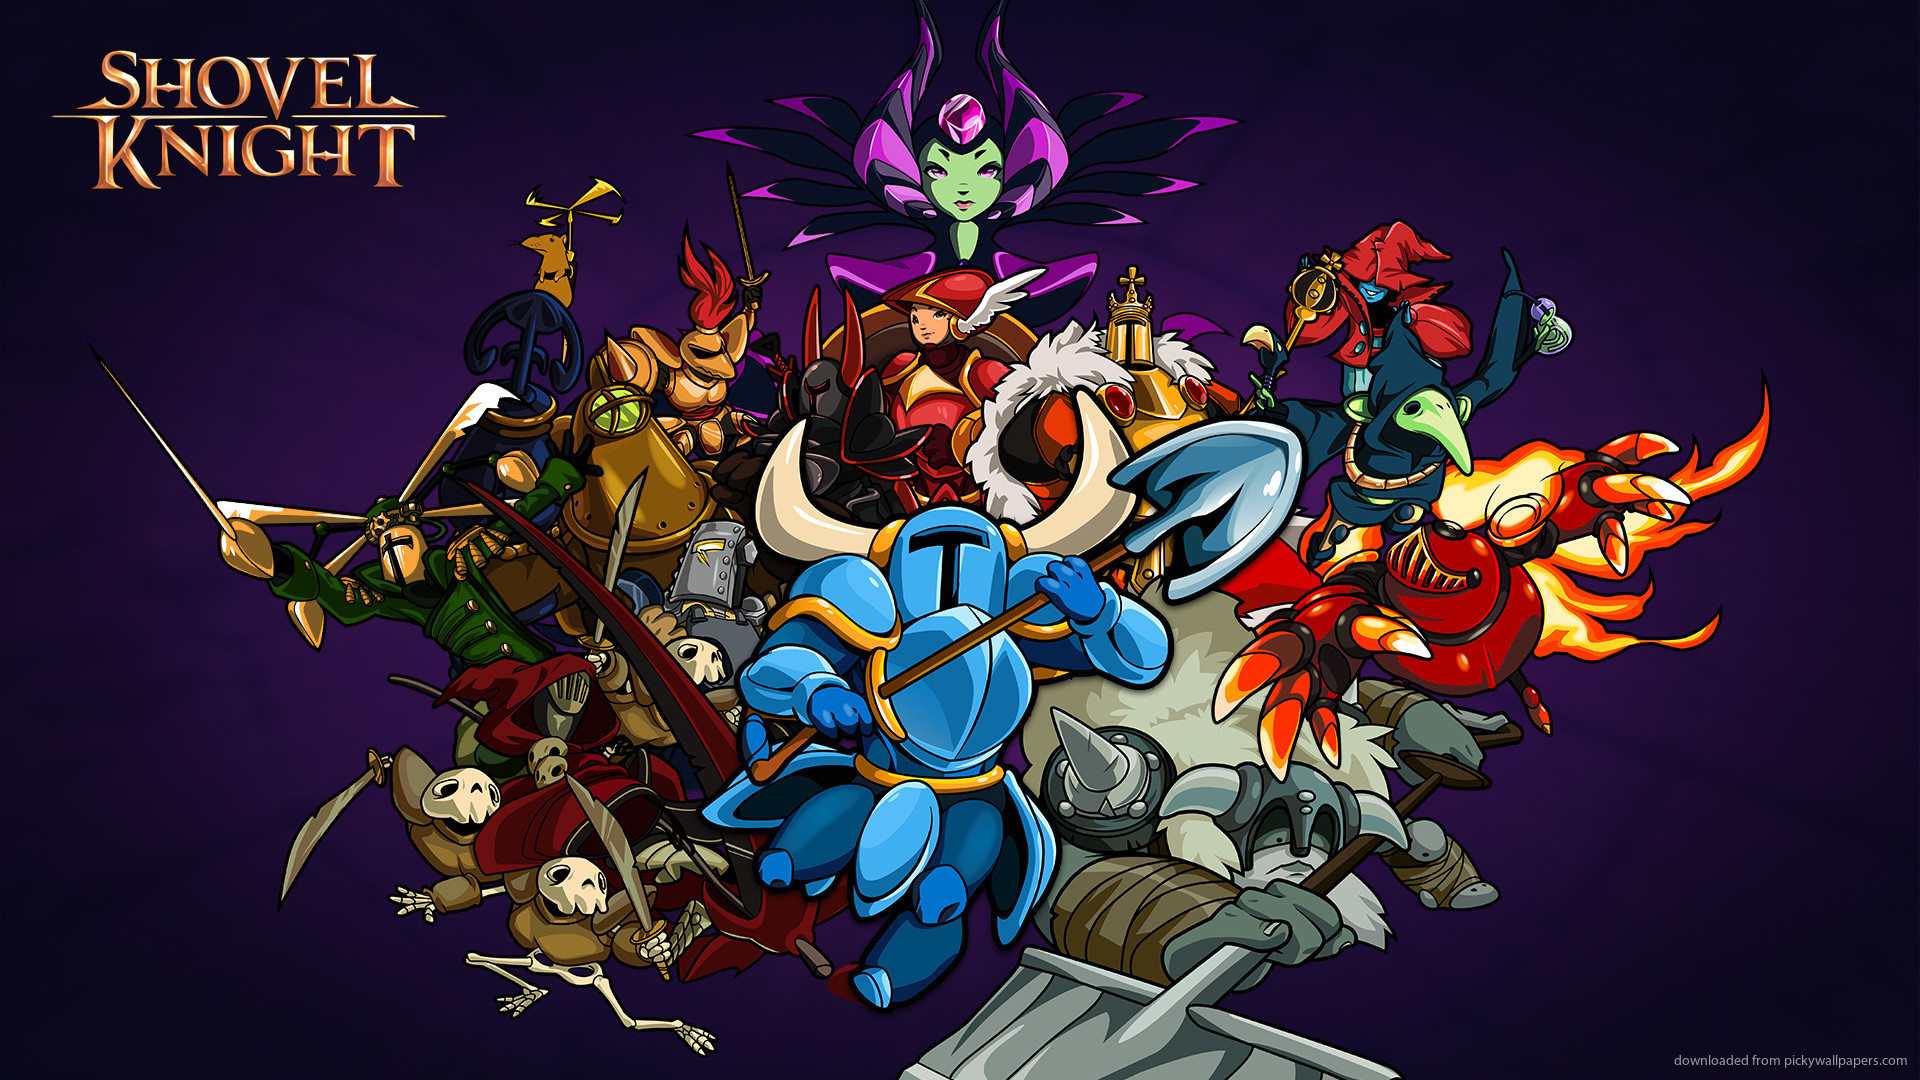 1920x1080 2014 Shovel Knight Video Game Wallpaper picture